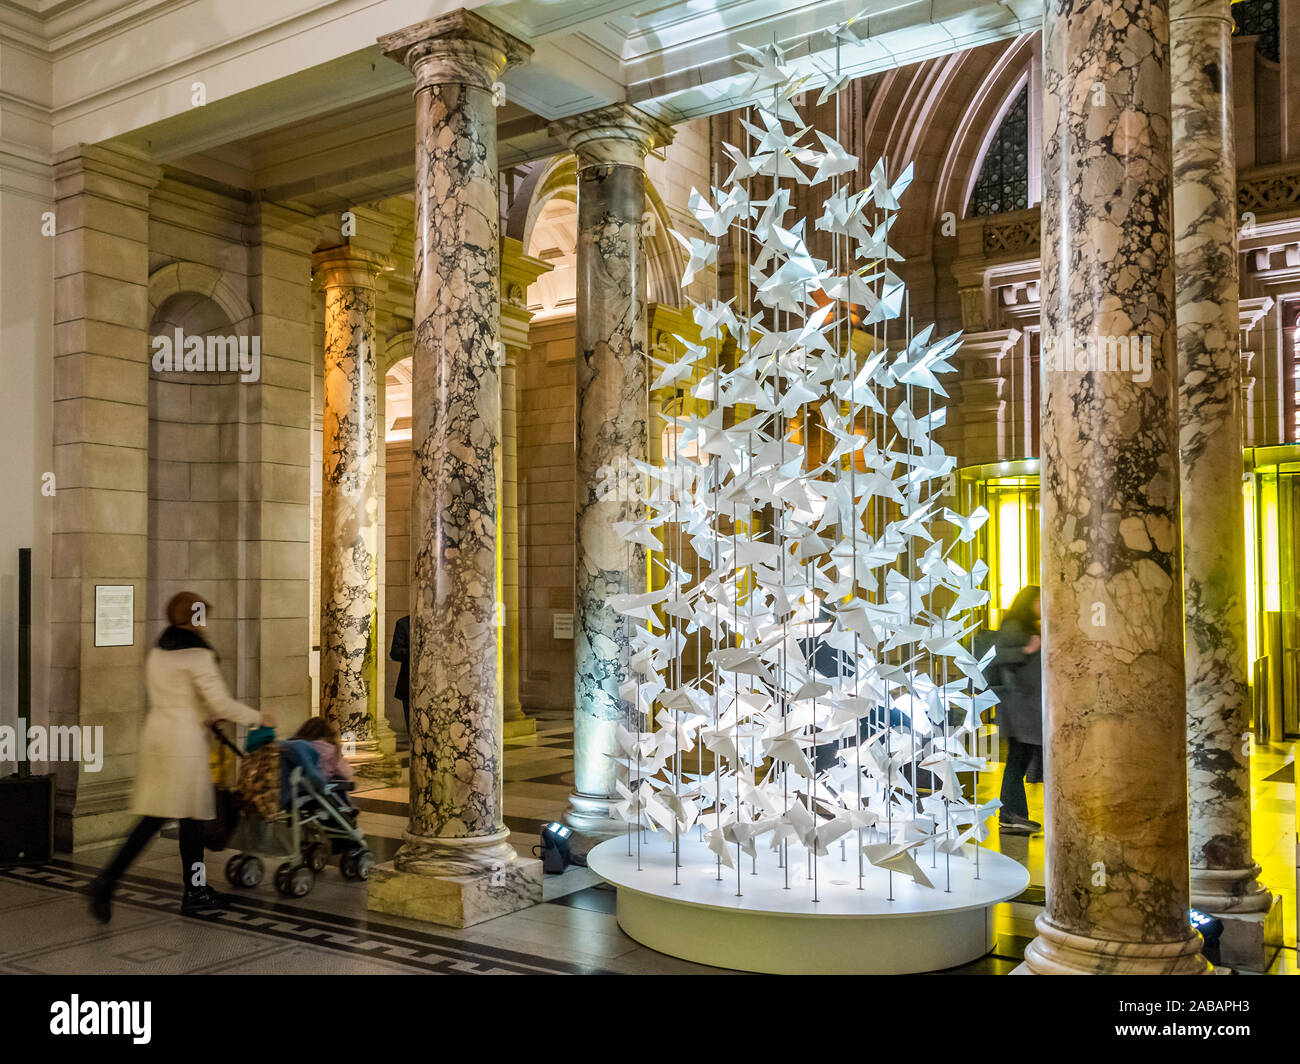 London, UK. 26th Nov 2019. The V&A Christmas tree installation, 'Freedom', is a contemporary reimagining of the Christmas tree and is the centrepiece of the this year's bicentenary celebrations, marking the 200th anniversary of Queen Victoria and Prince Albert's births. Each of the 200 ornately folded origami birds represents a year of the bicentenary. Created by designer Anna Hünnerkopf as part of a competition for students of the University of Applied Sciences in Coburg. Credit: Guy Bell/Alamy Live News Stock Photo